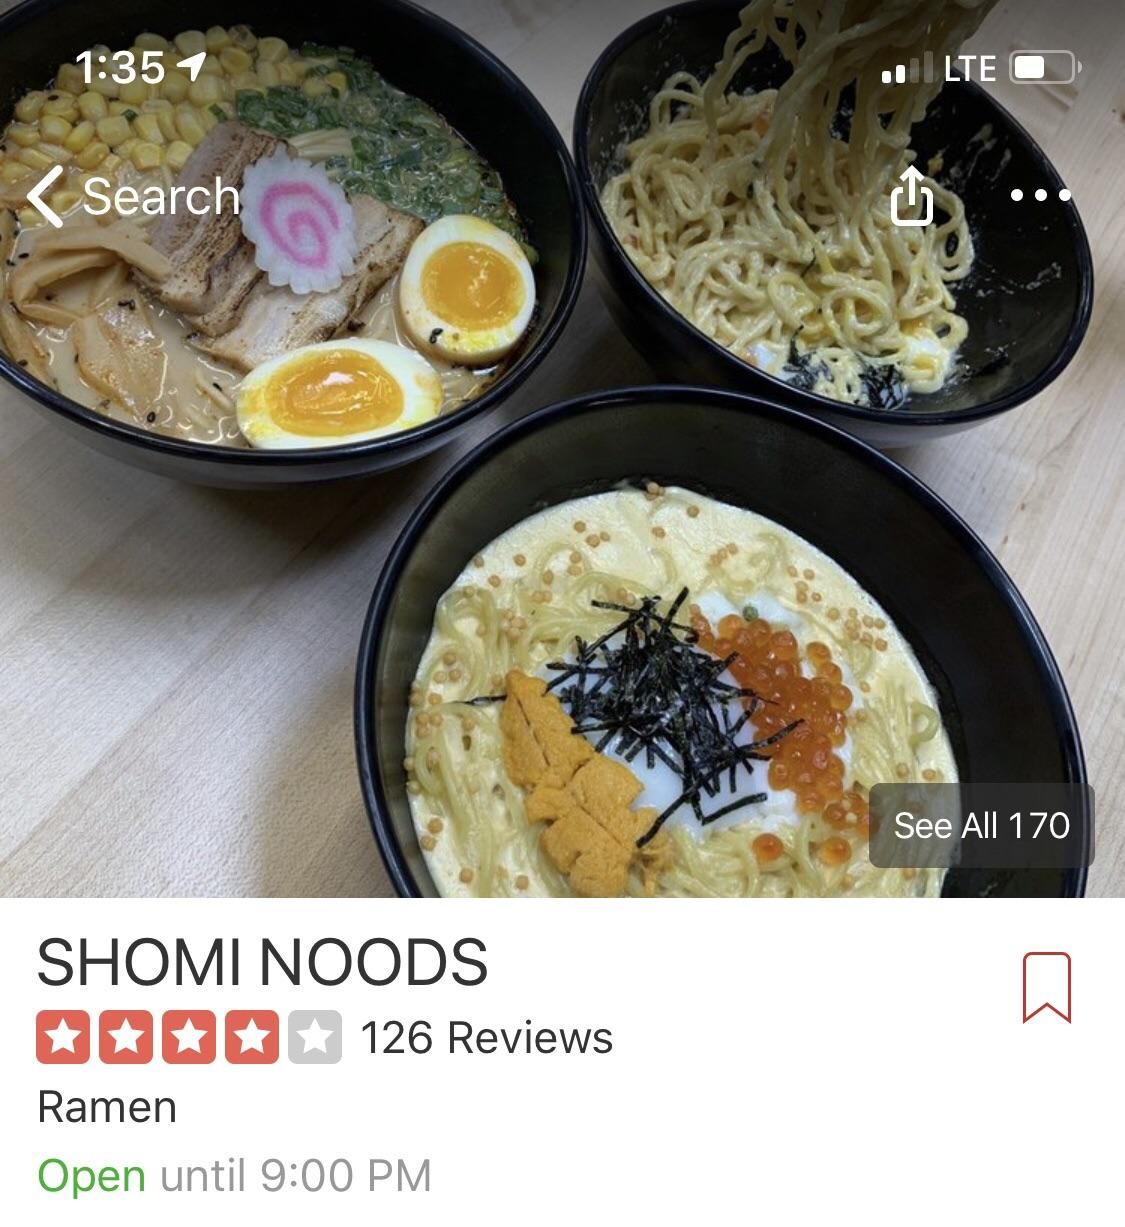 Great name for a ramen place